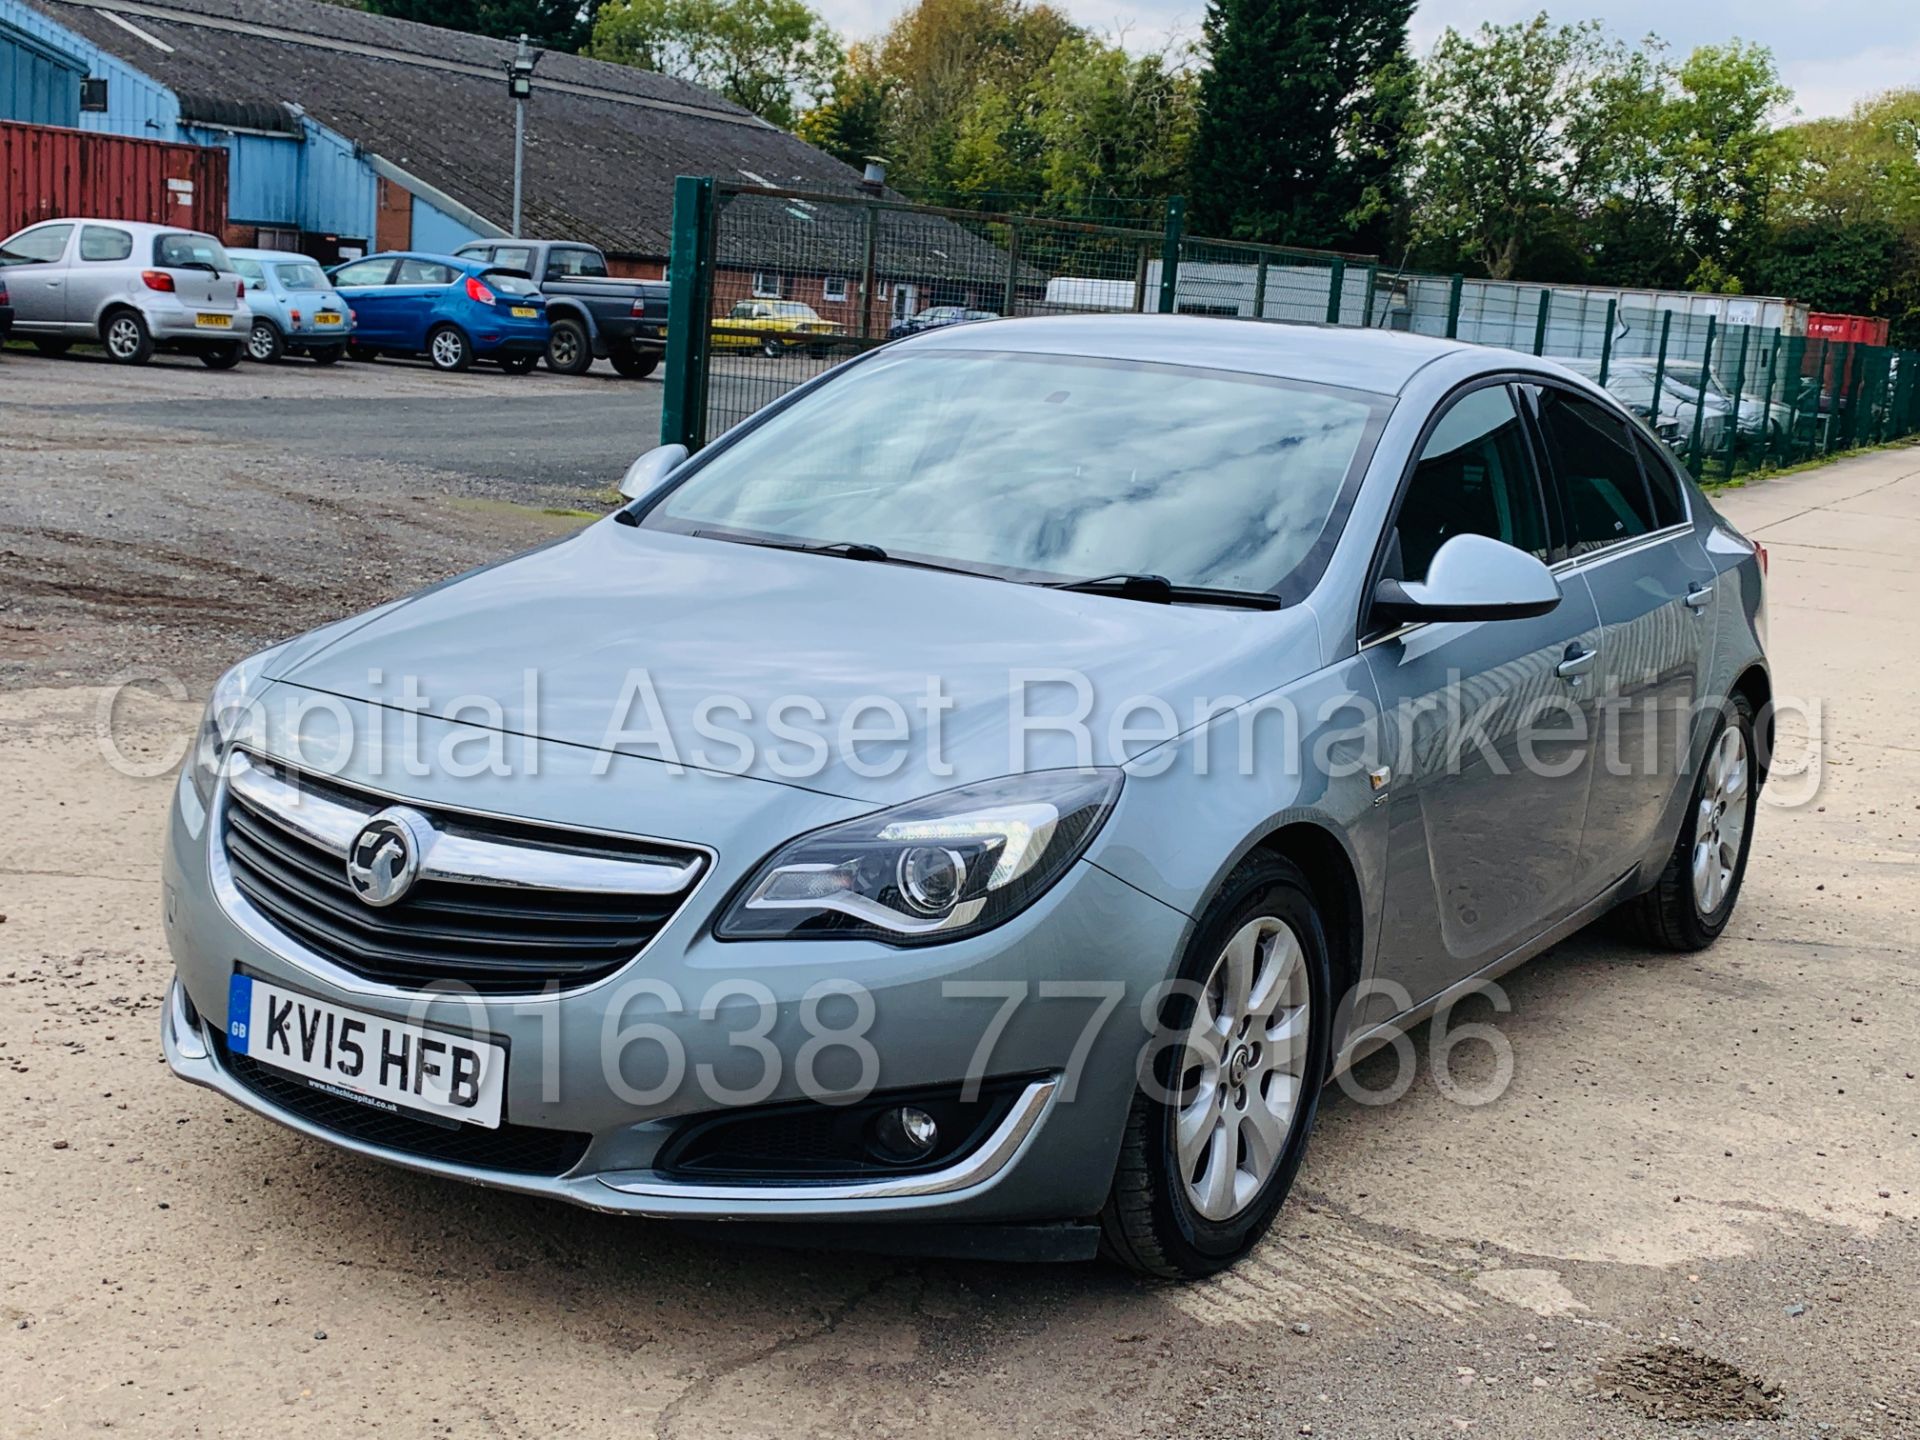 VAUXHALL INSIGNIA *SRI EDITION* (2015 - NEW MODEL) '2.0 CDTI - STOP/START - 6 SPEED' (1 OWNER) - Image 5 of 40